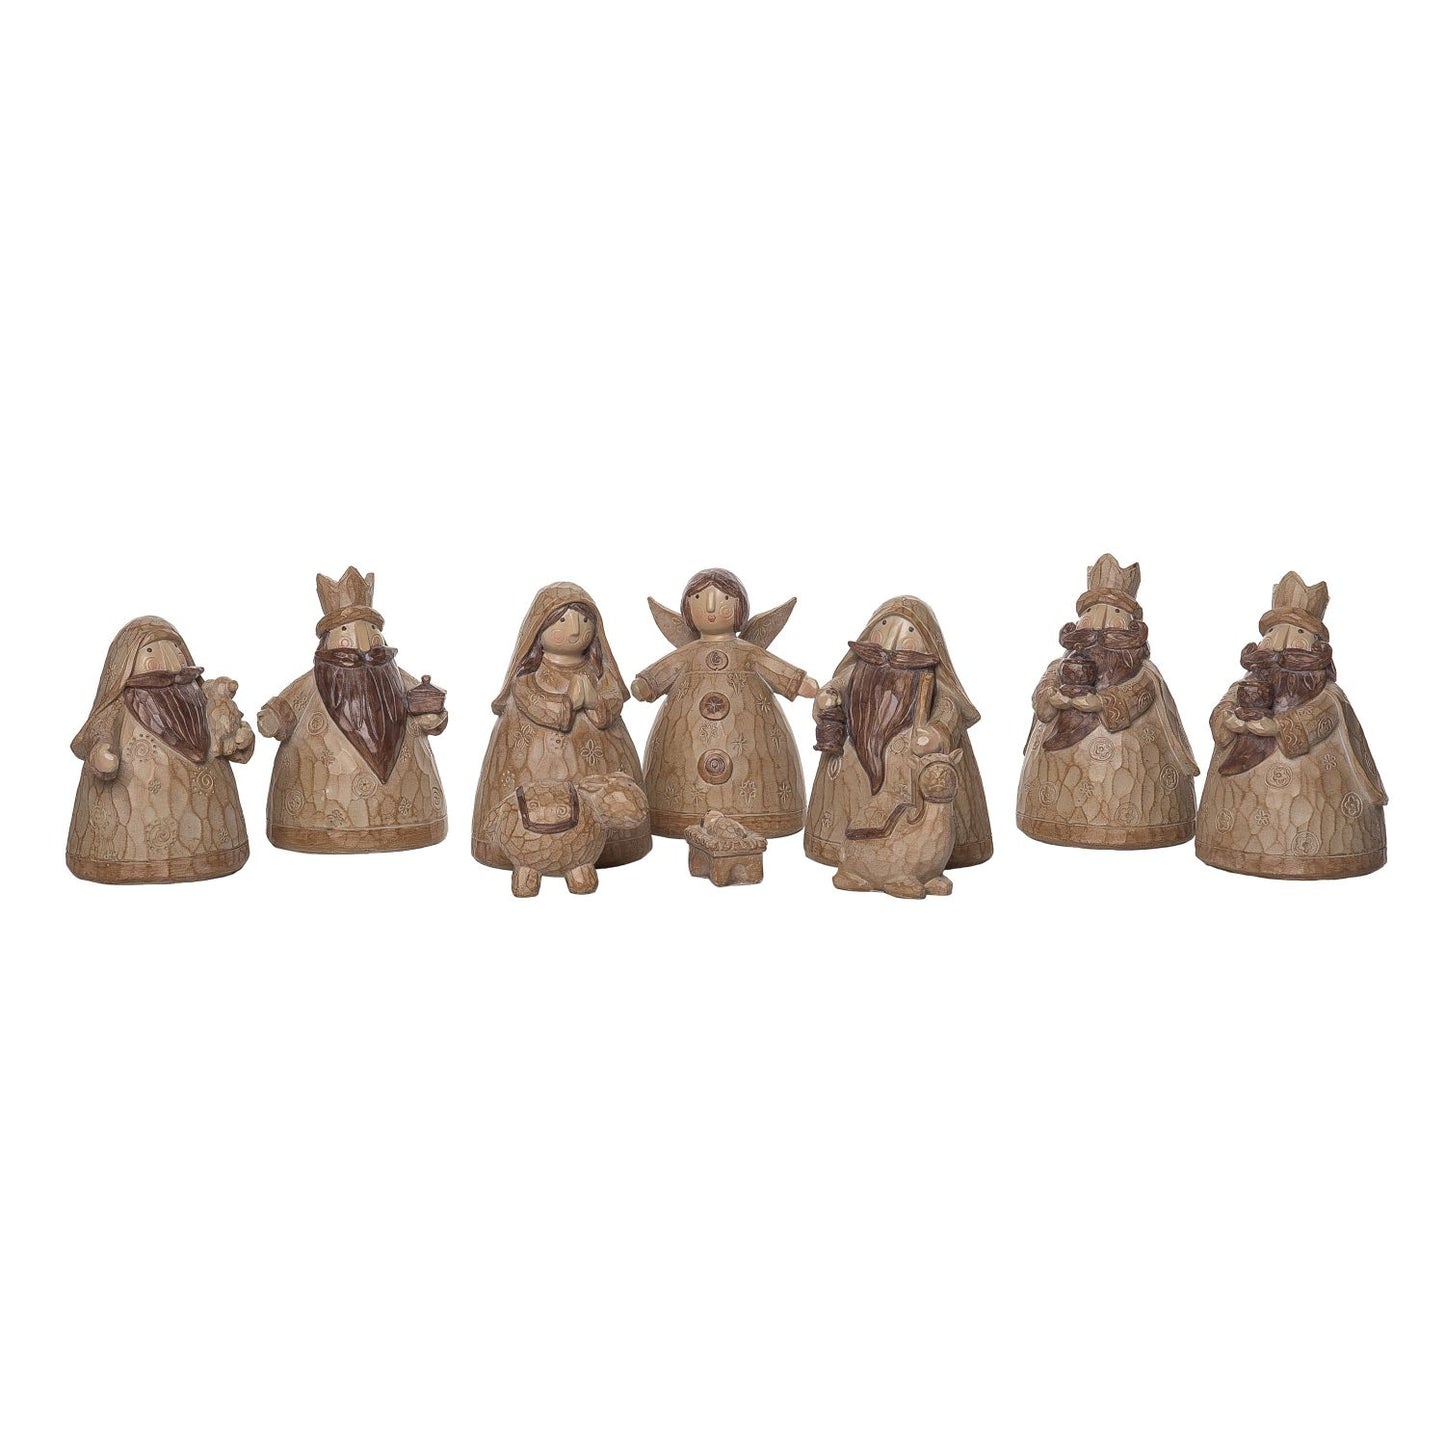 Transpac Resin Wood Carved Nativity, Set Of 10